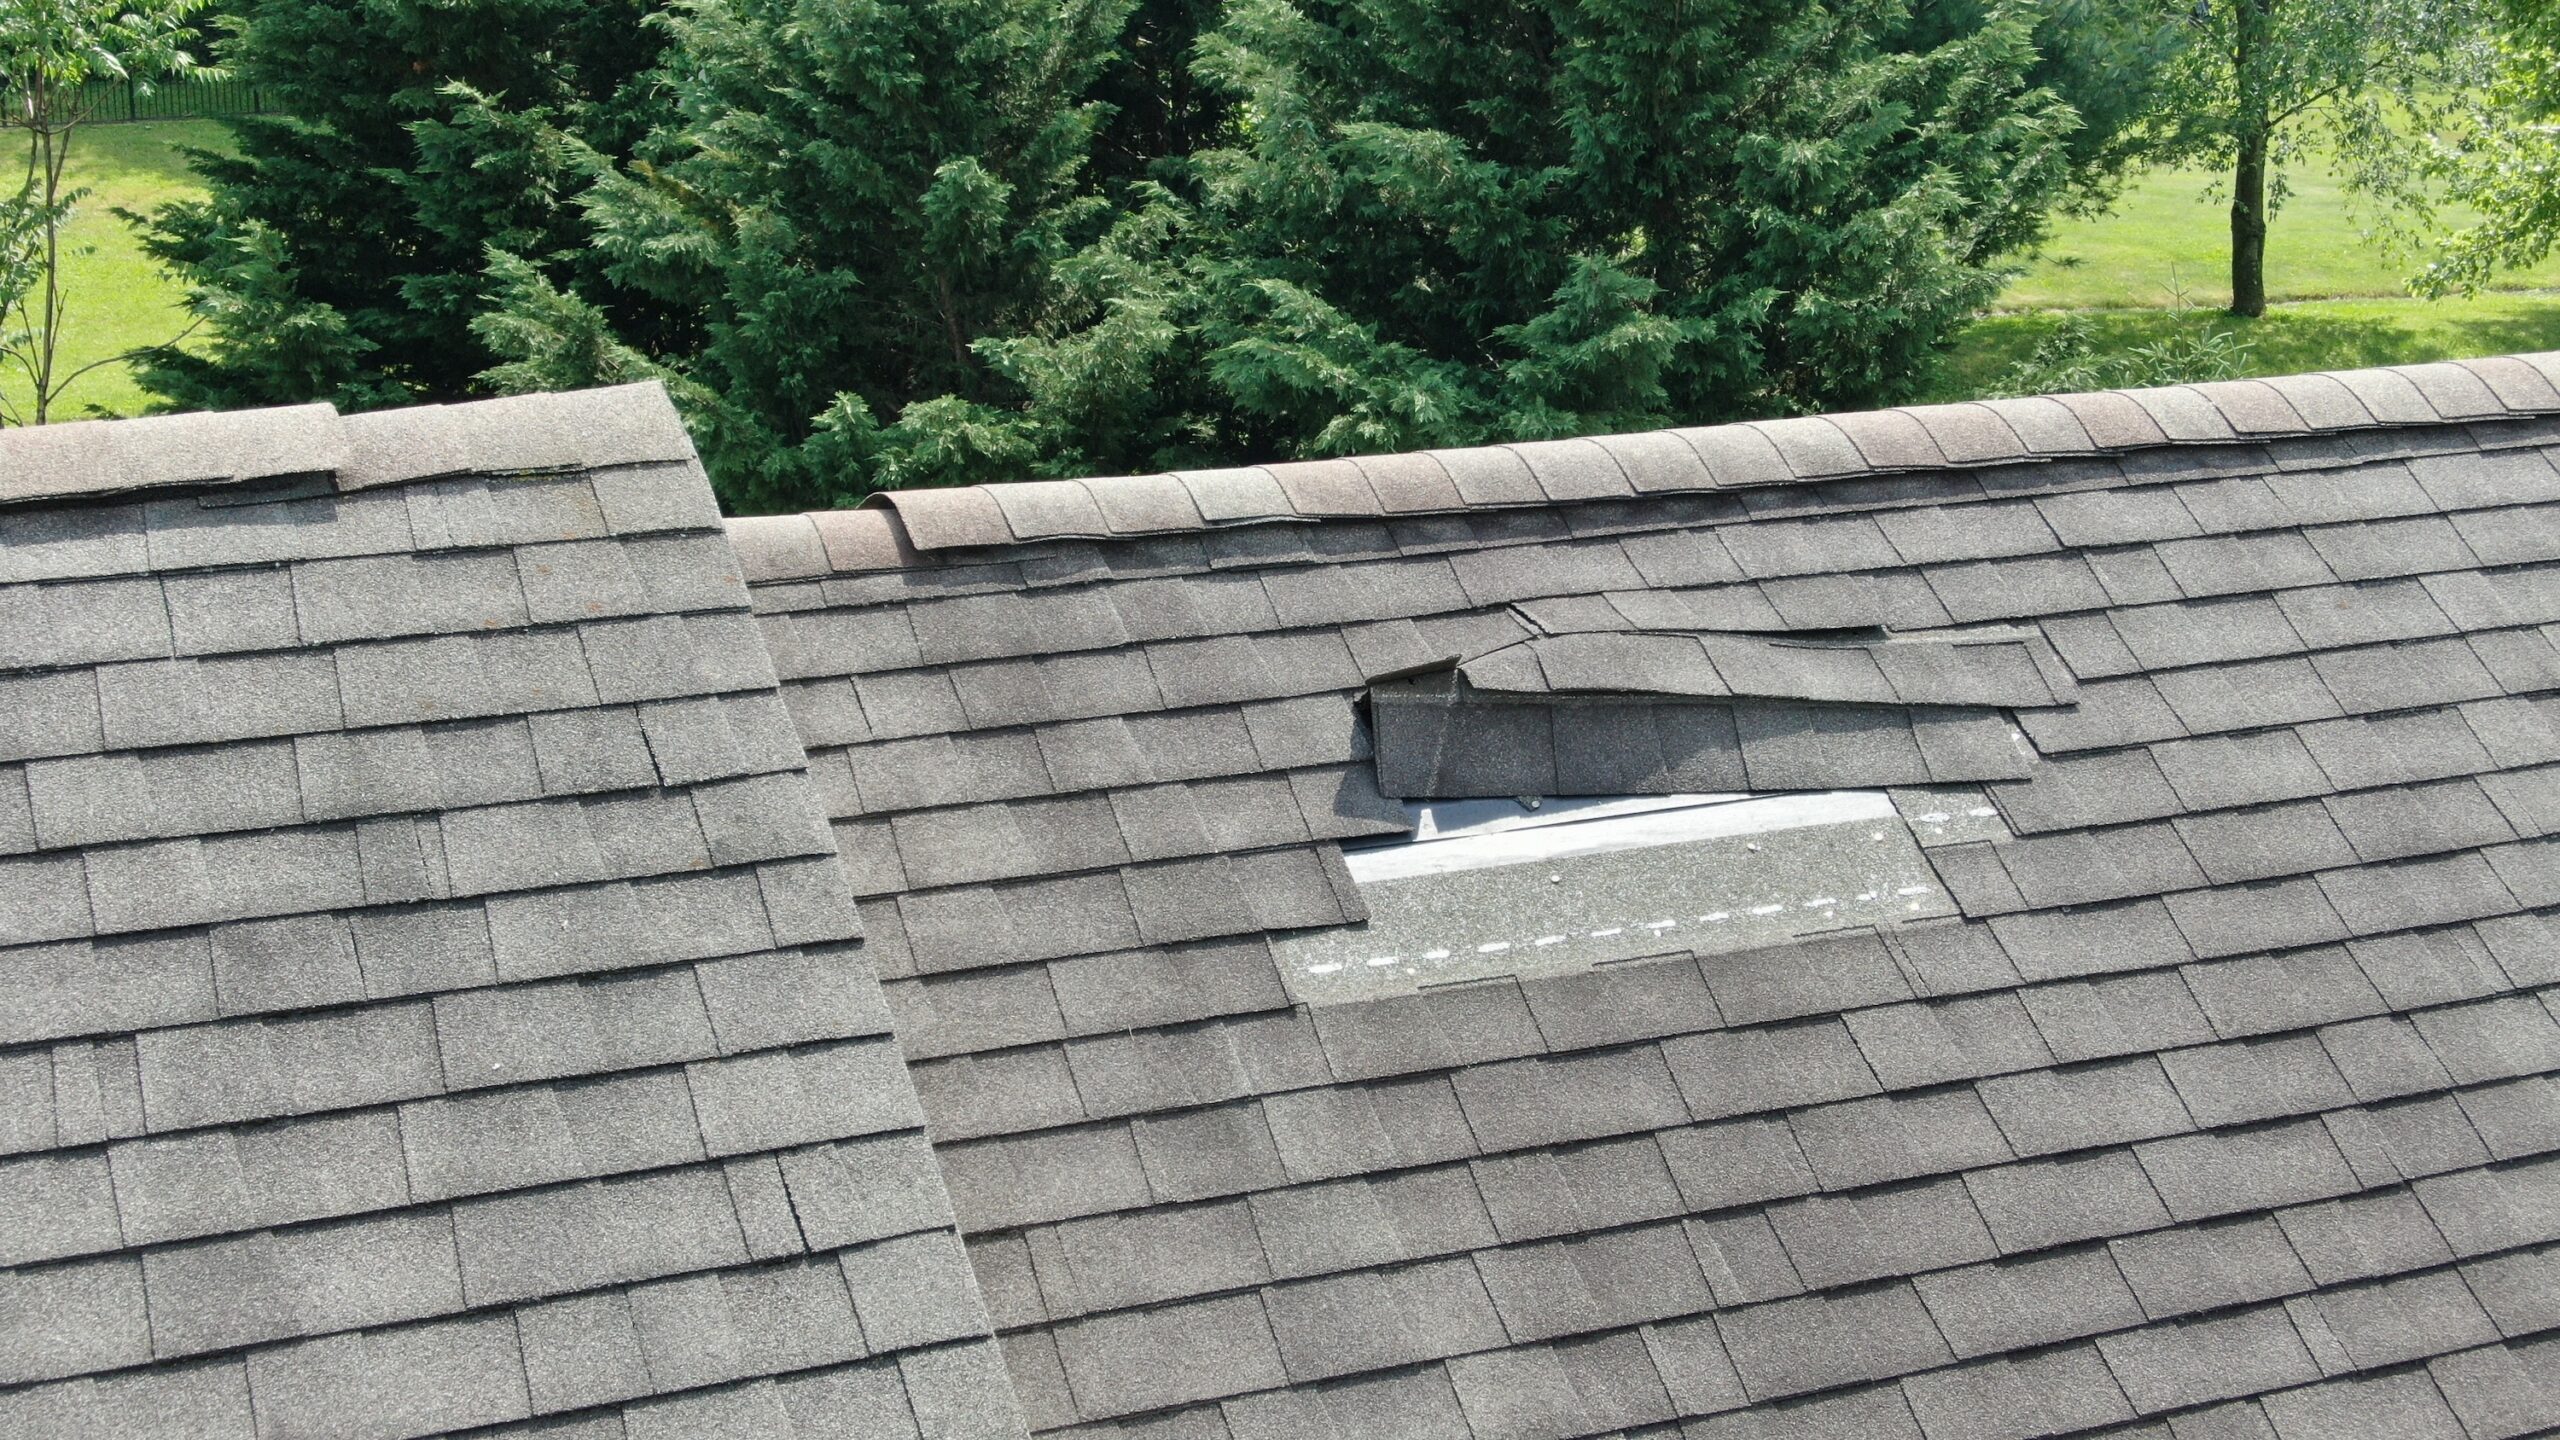 How to make an insurance claim for roof damage